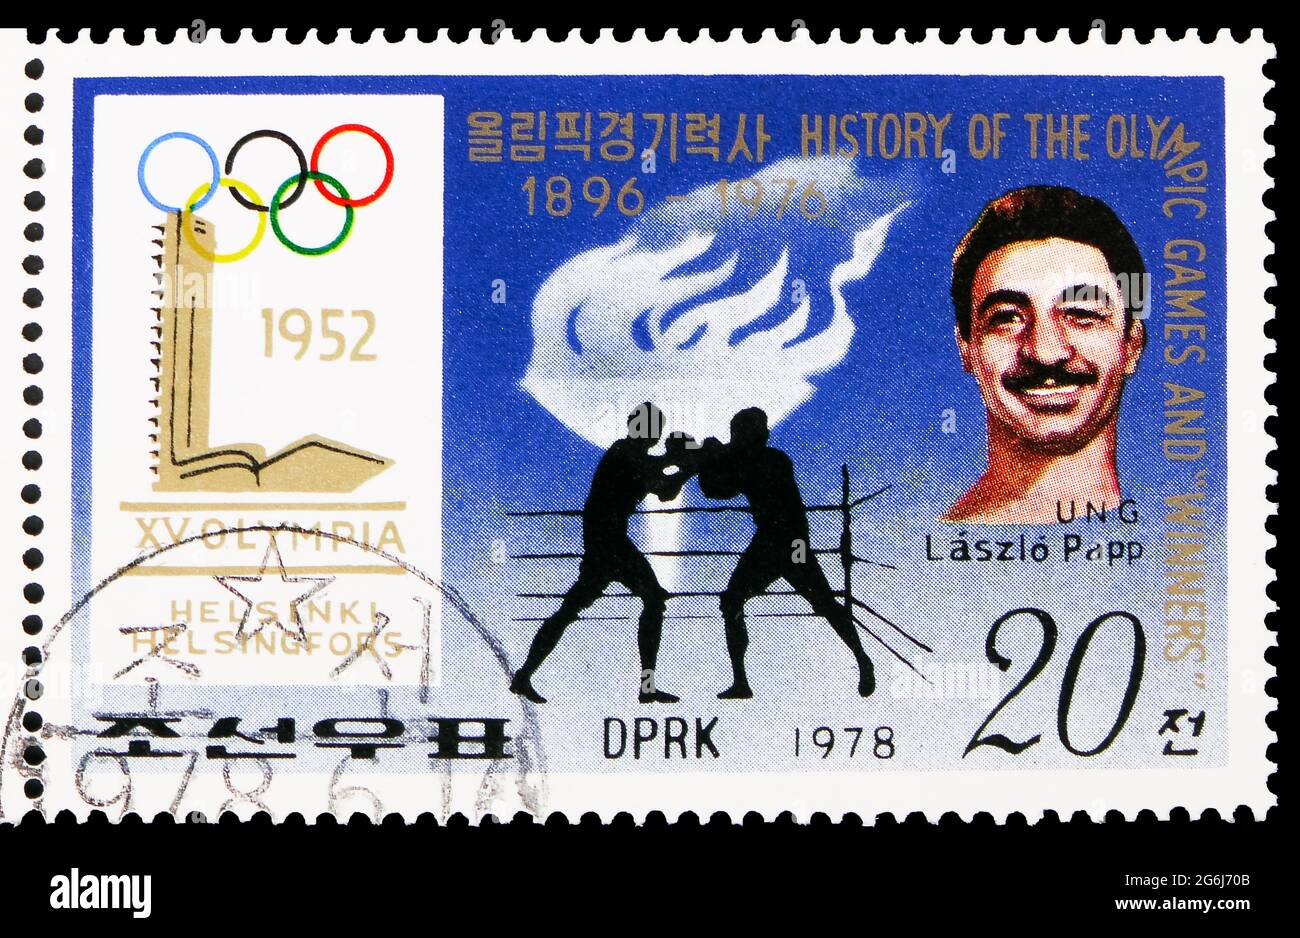 MOSCOW, RUSSIA - MARCH 21, 2020: Postage stamp printed in Korea shows Boxing (Laszlo Papp), History of the Olympics - posters and gold medalist serie, Stock Photo